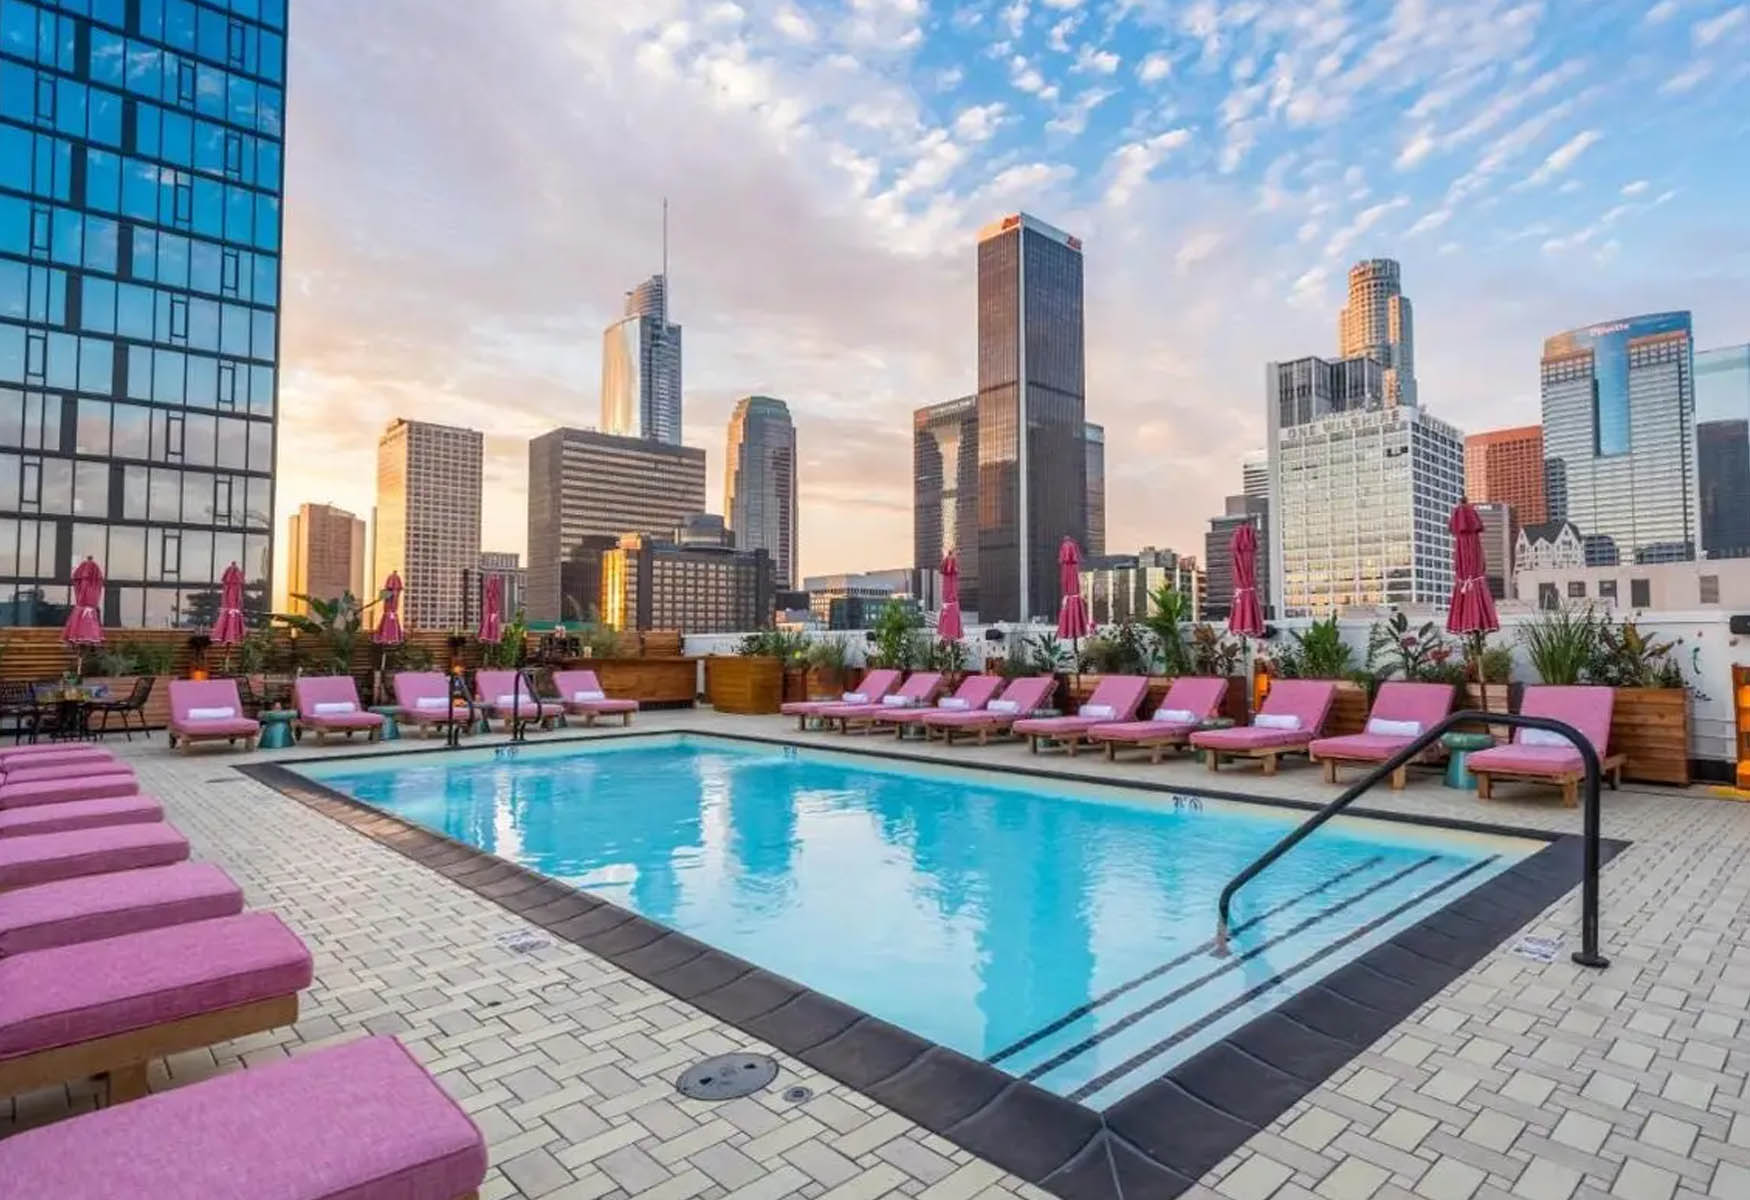 Where To Stay In Los Angeles: Best Areas And Hotels For Every Budget